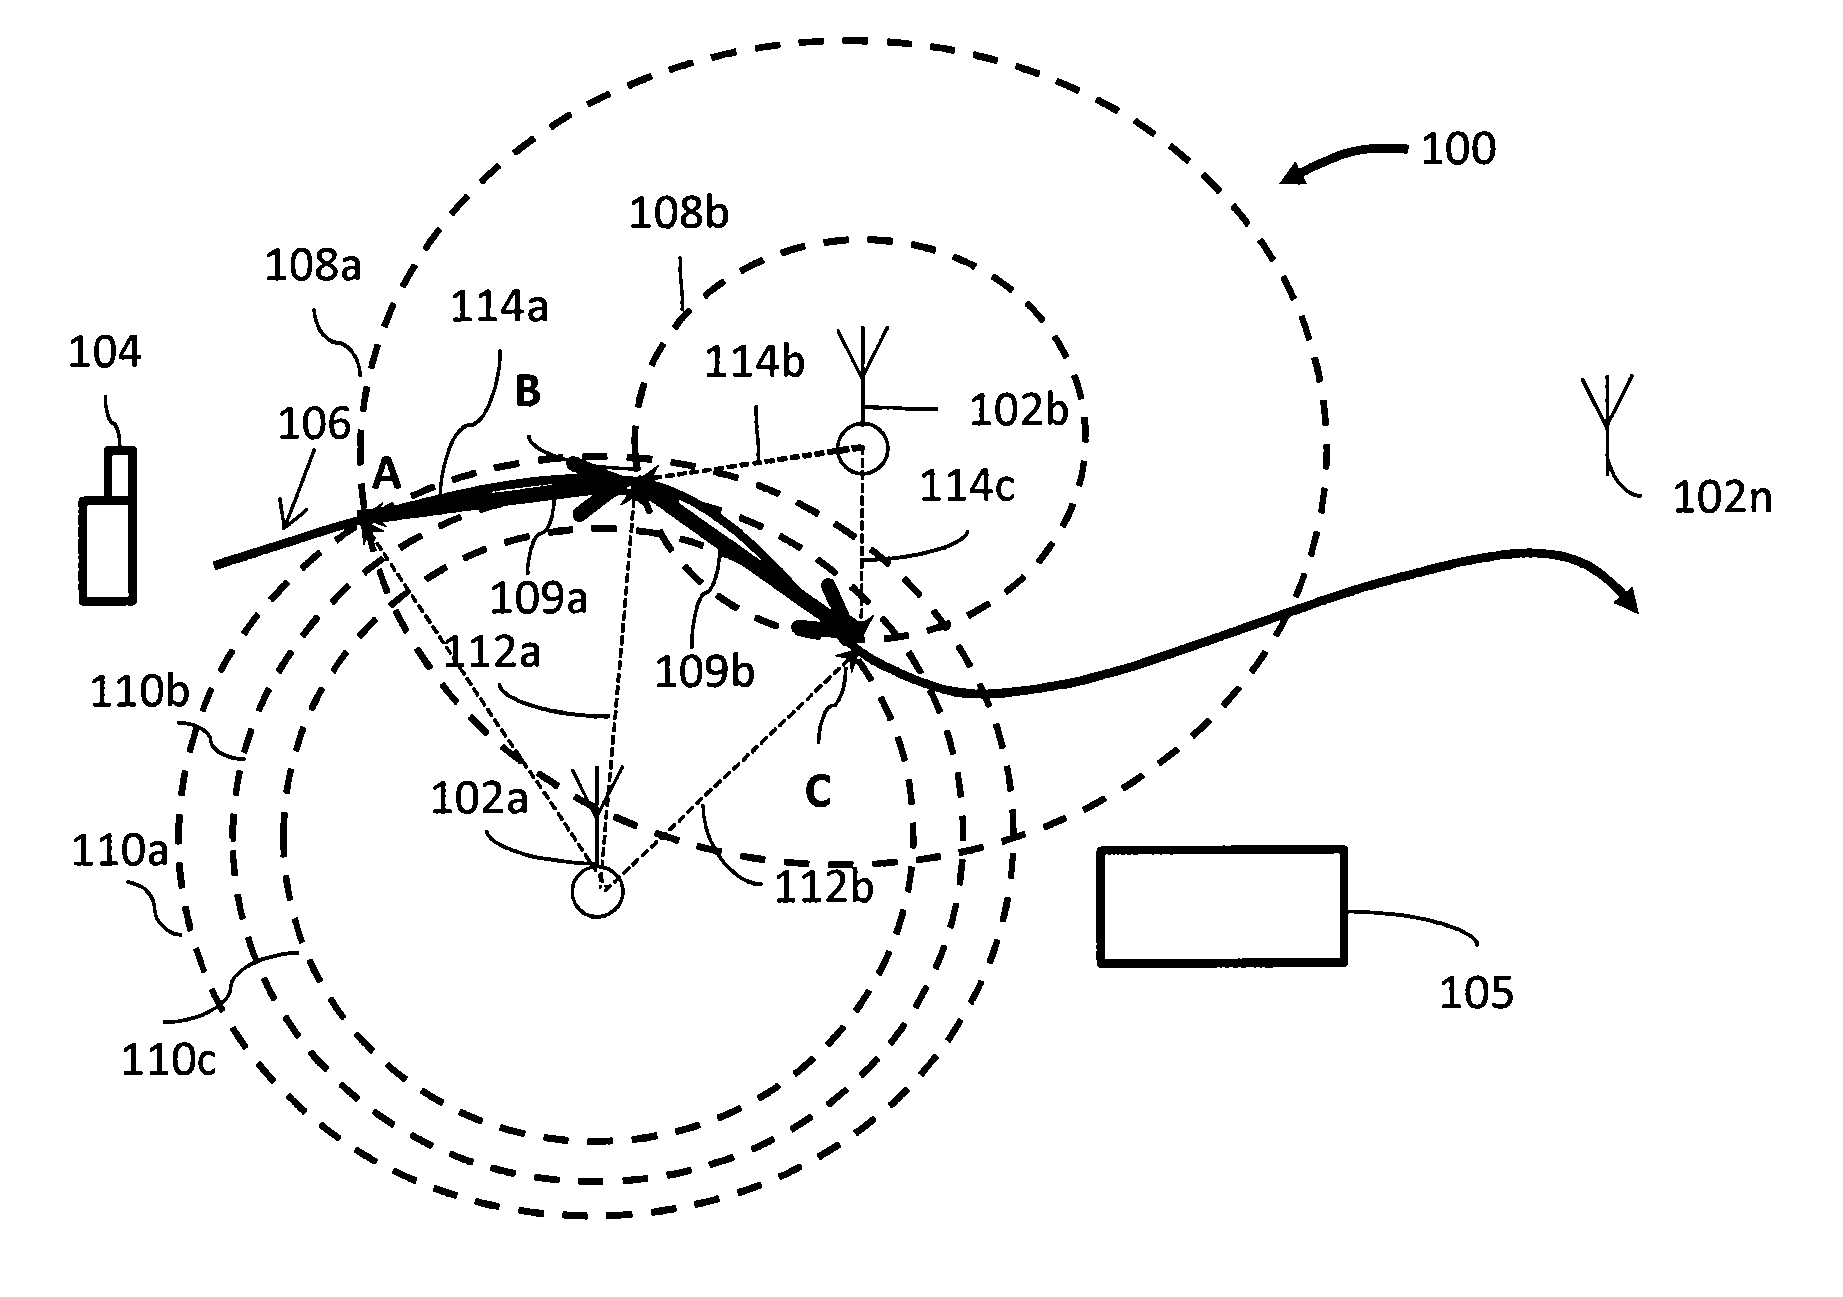 Access point location identification methods and apparatus based on absolute and relative harvesting